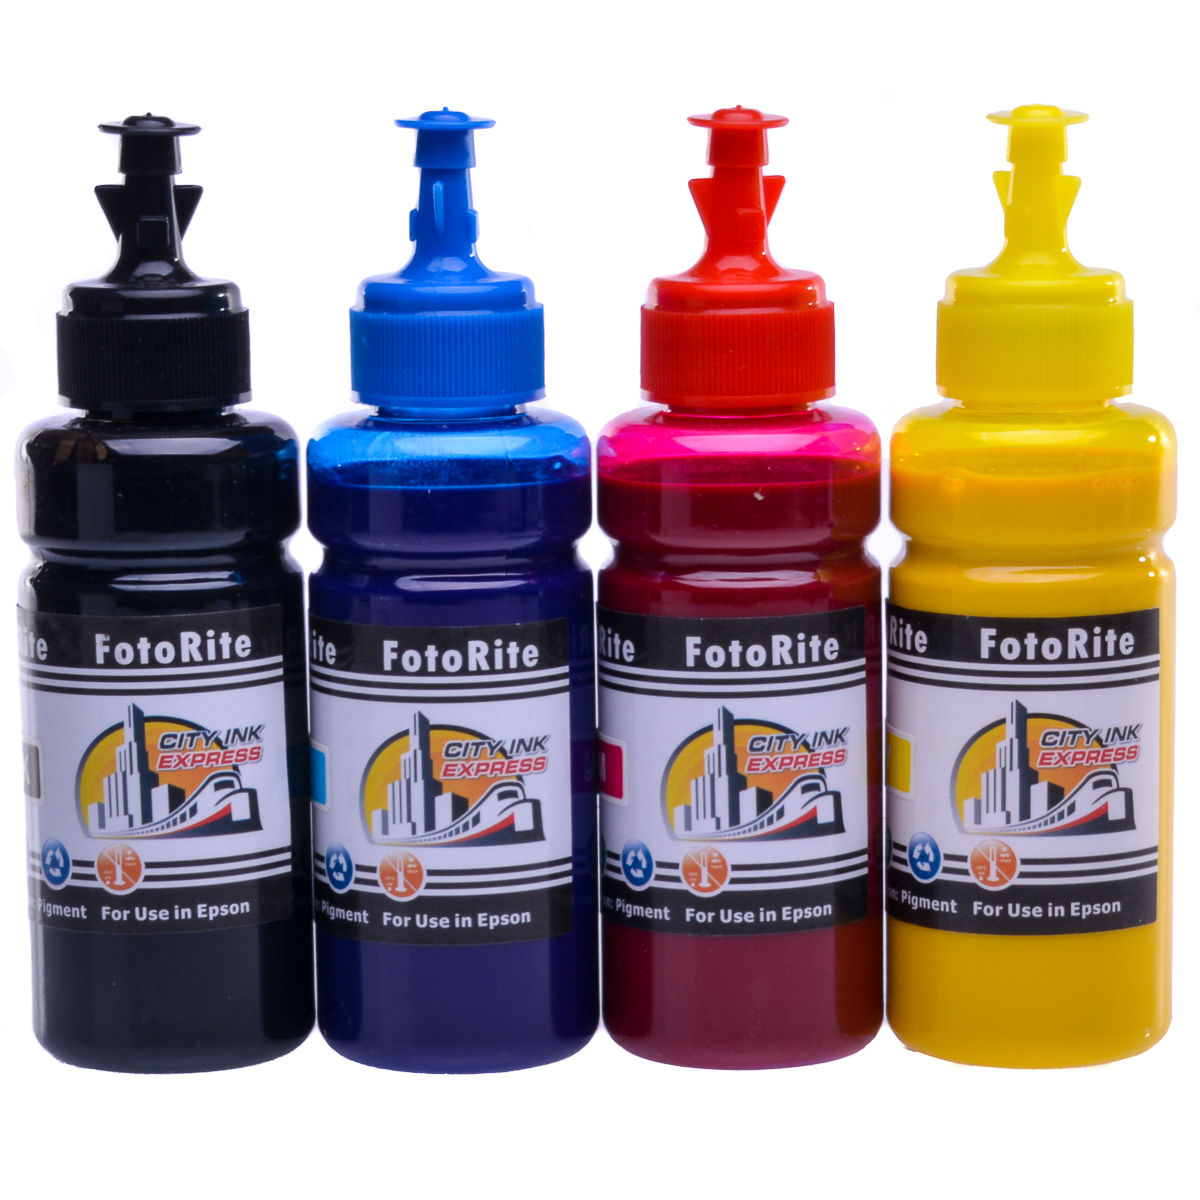 Cheap Multipack pigment ink refill replaces Epson XP-3205